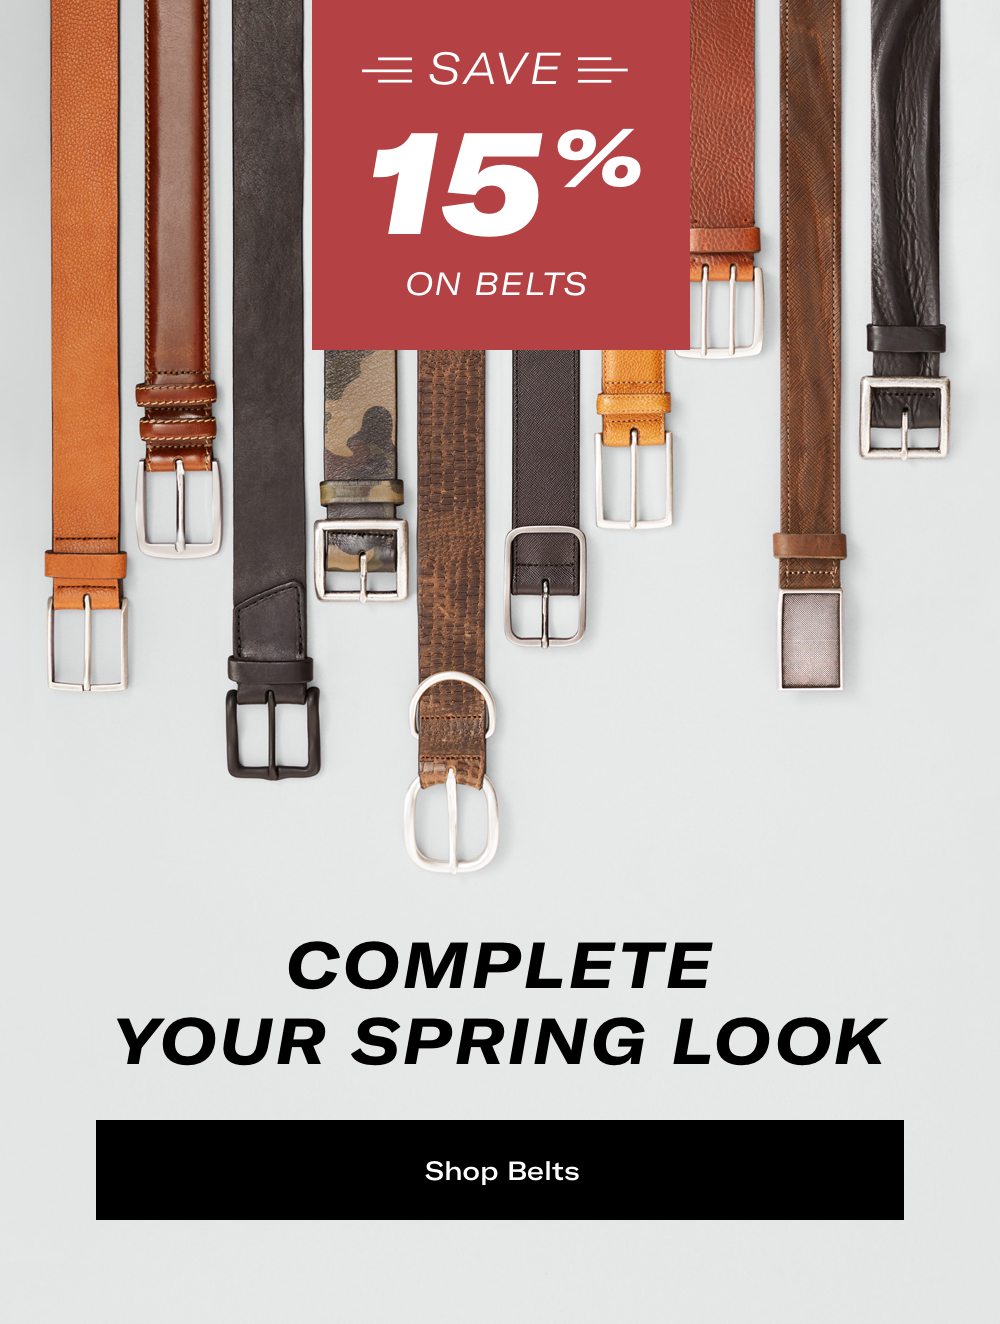 Complete Your Spring Look: Save 15% on Belts